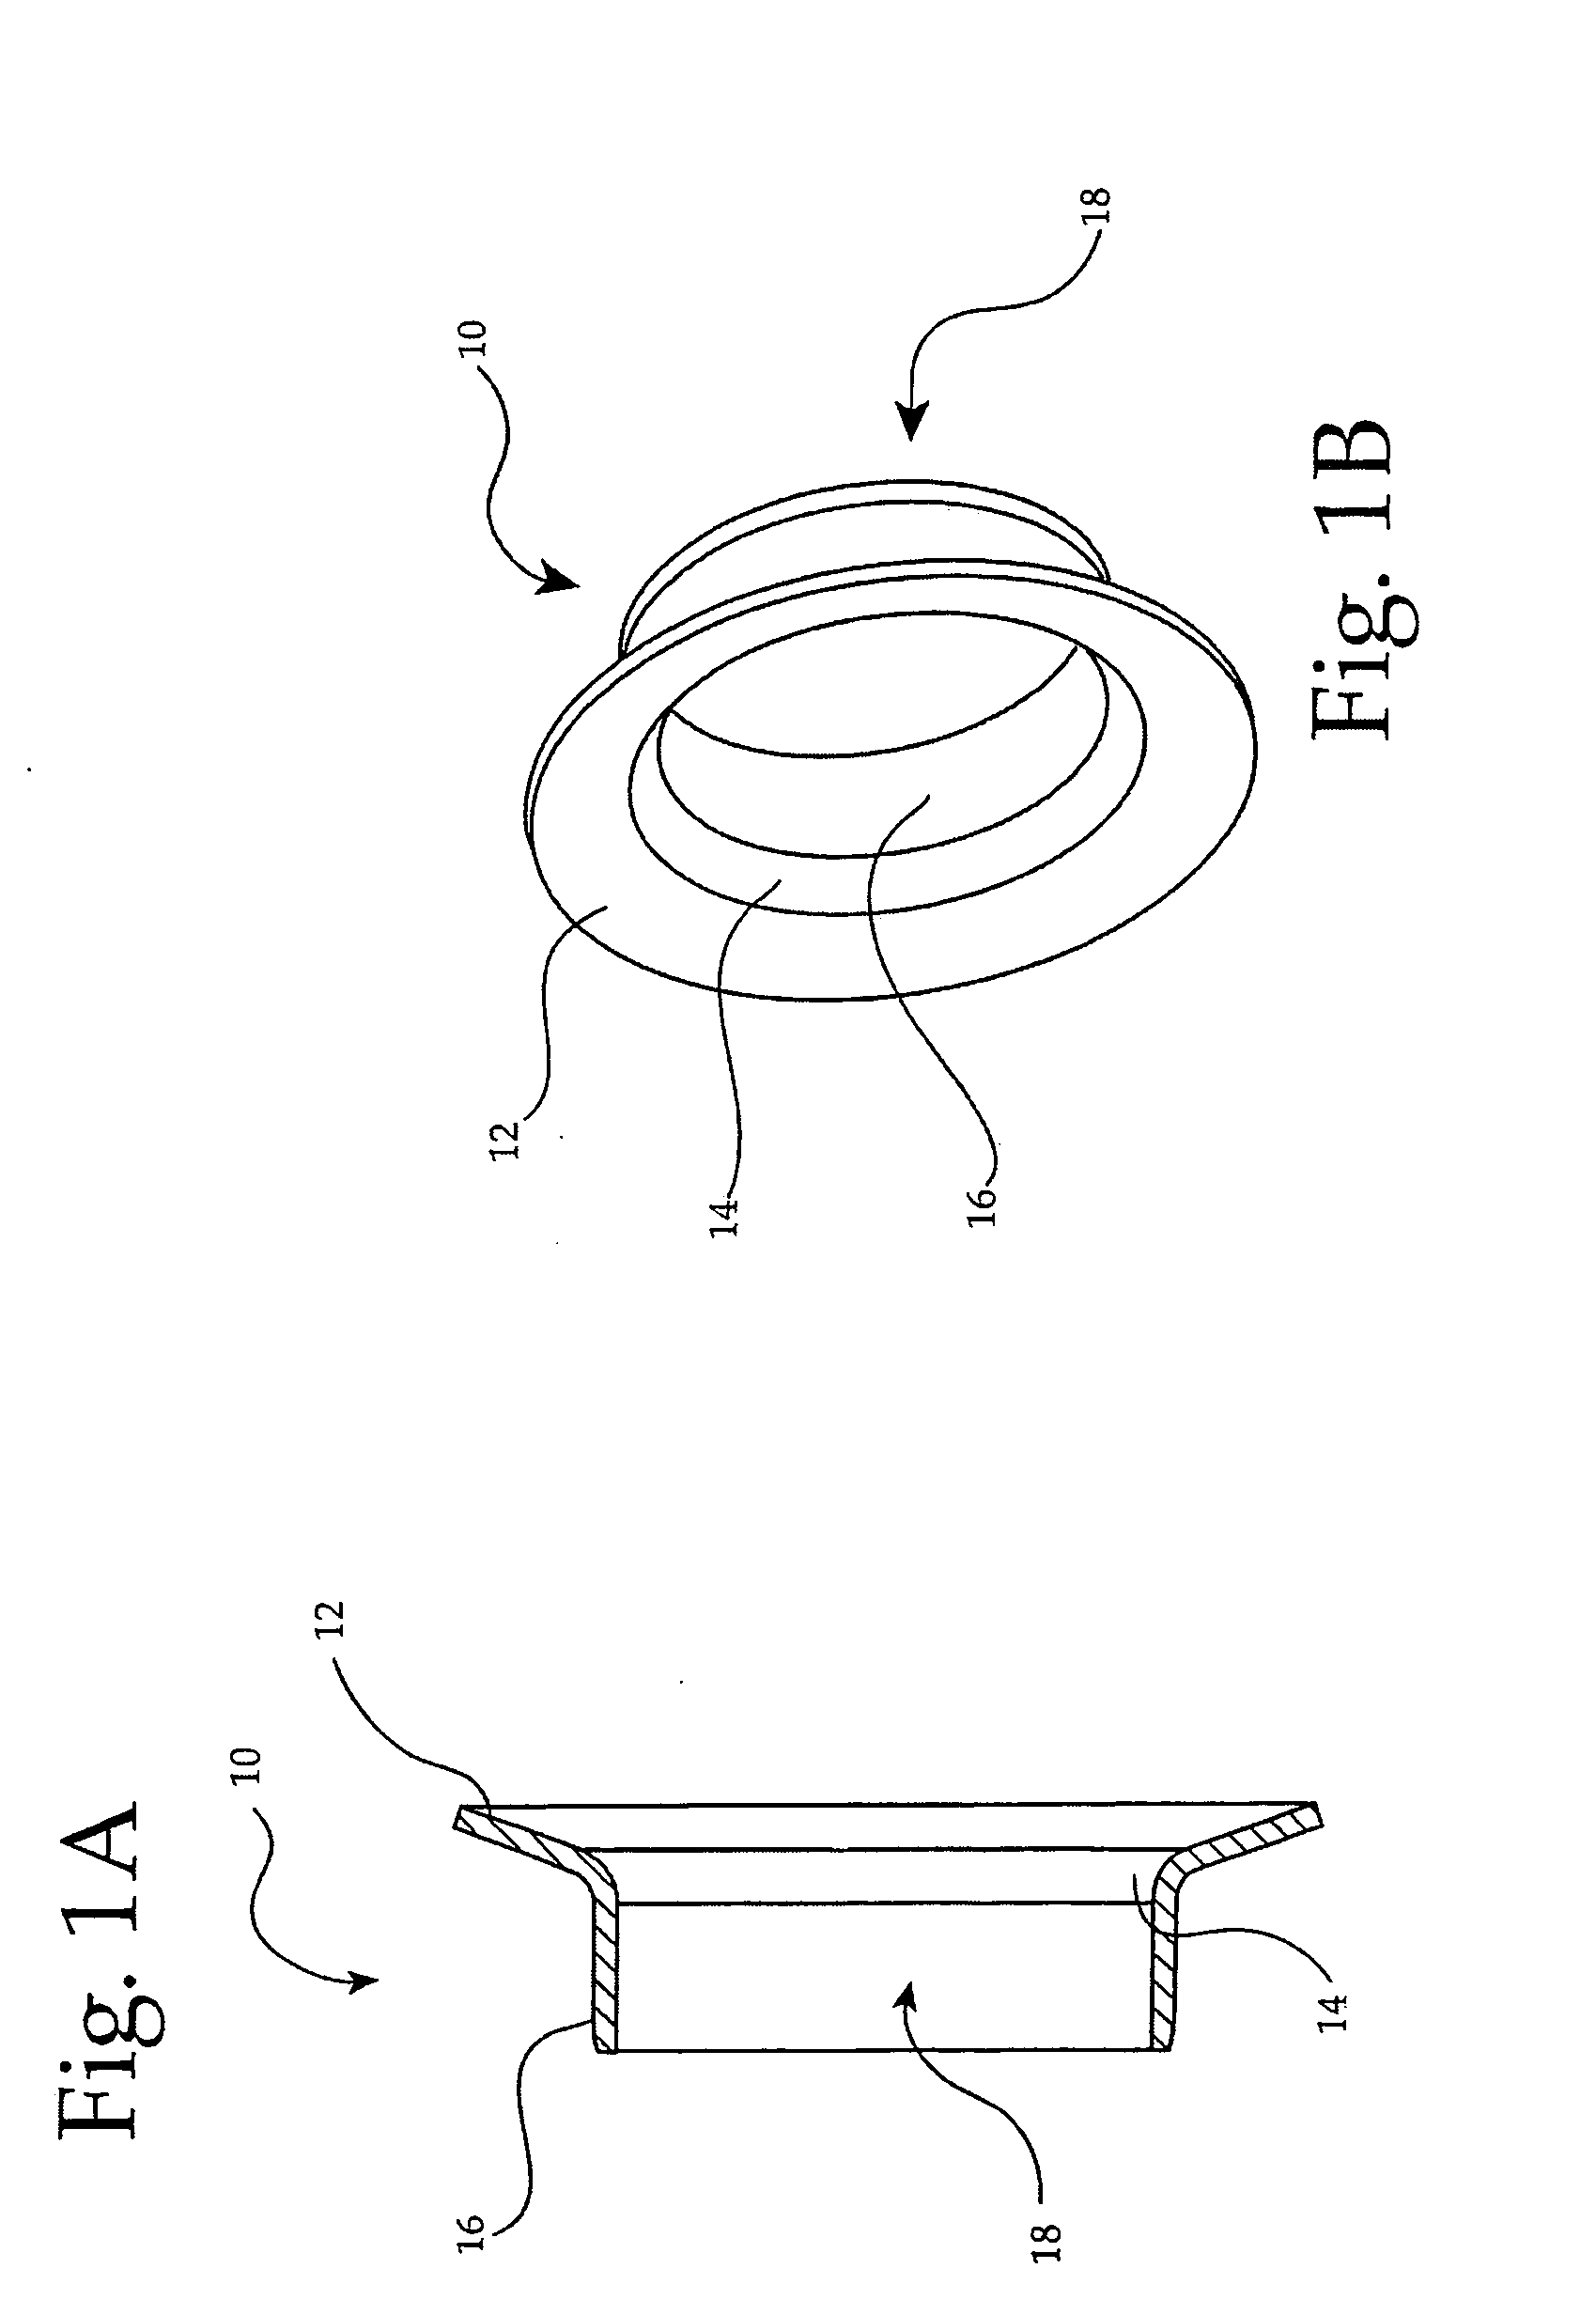 Flexible RF seal for coaxial cable connector